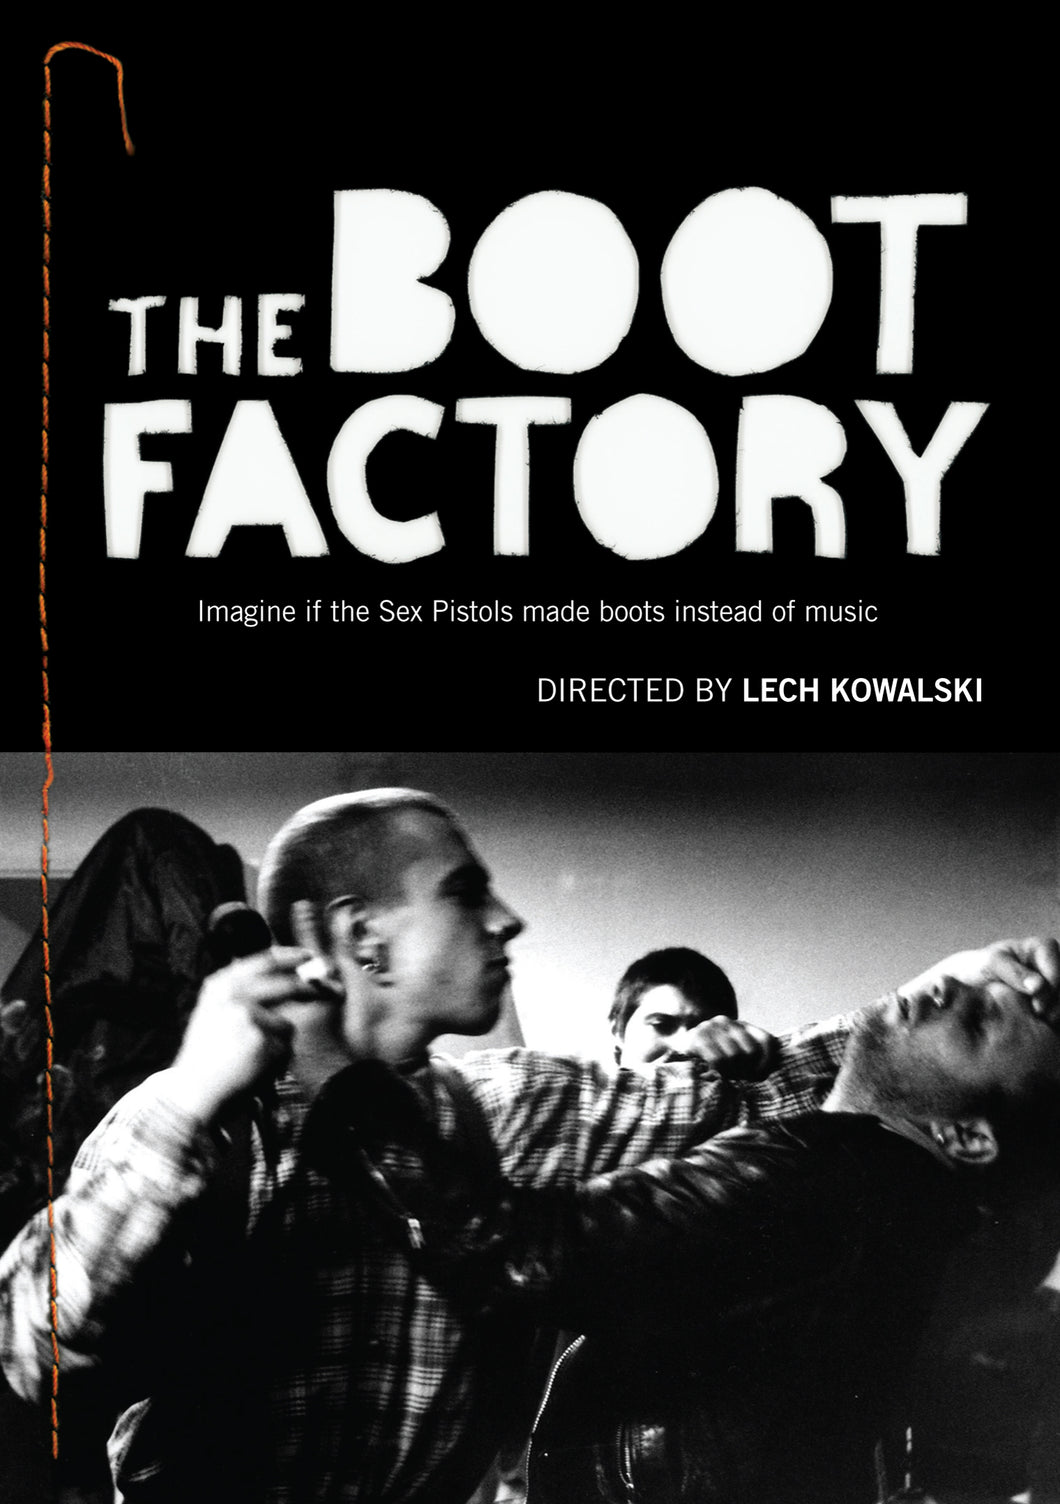 The Boot Factory: The Lech Kowalski Collection (DVD)